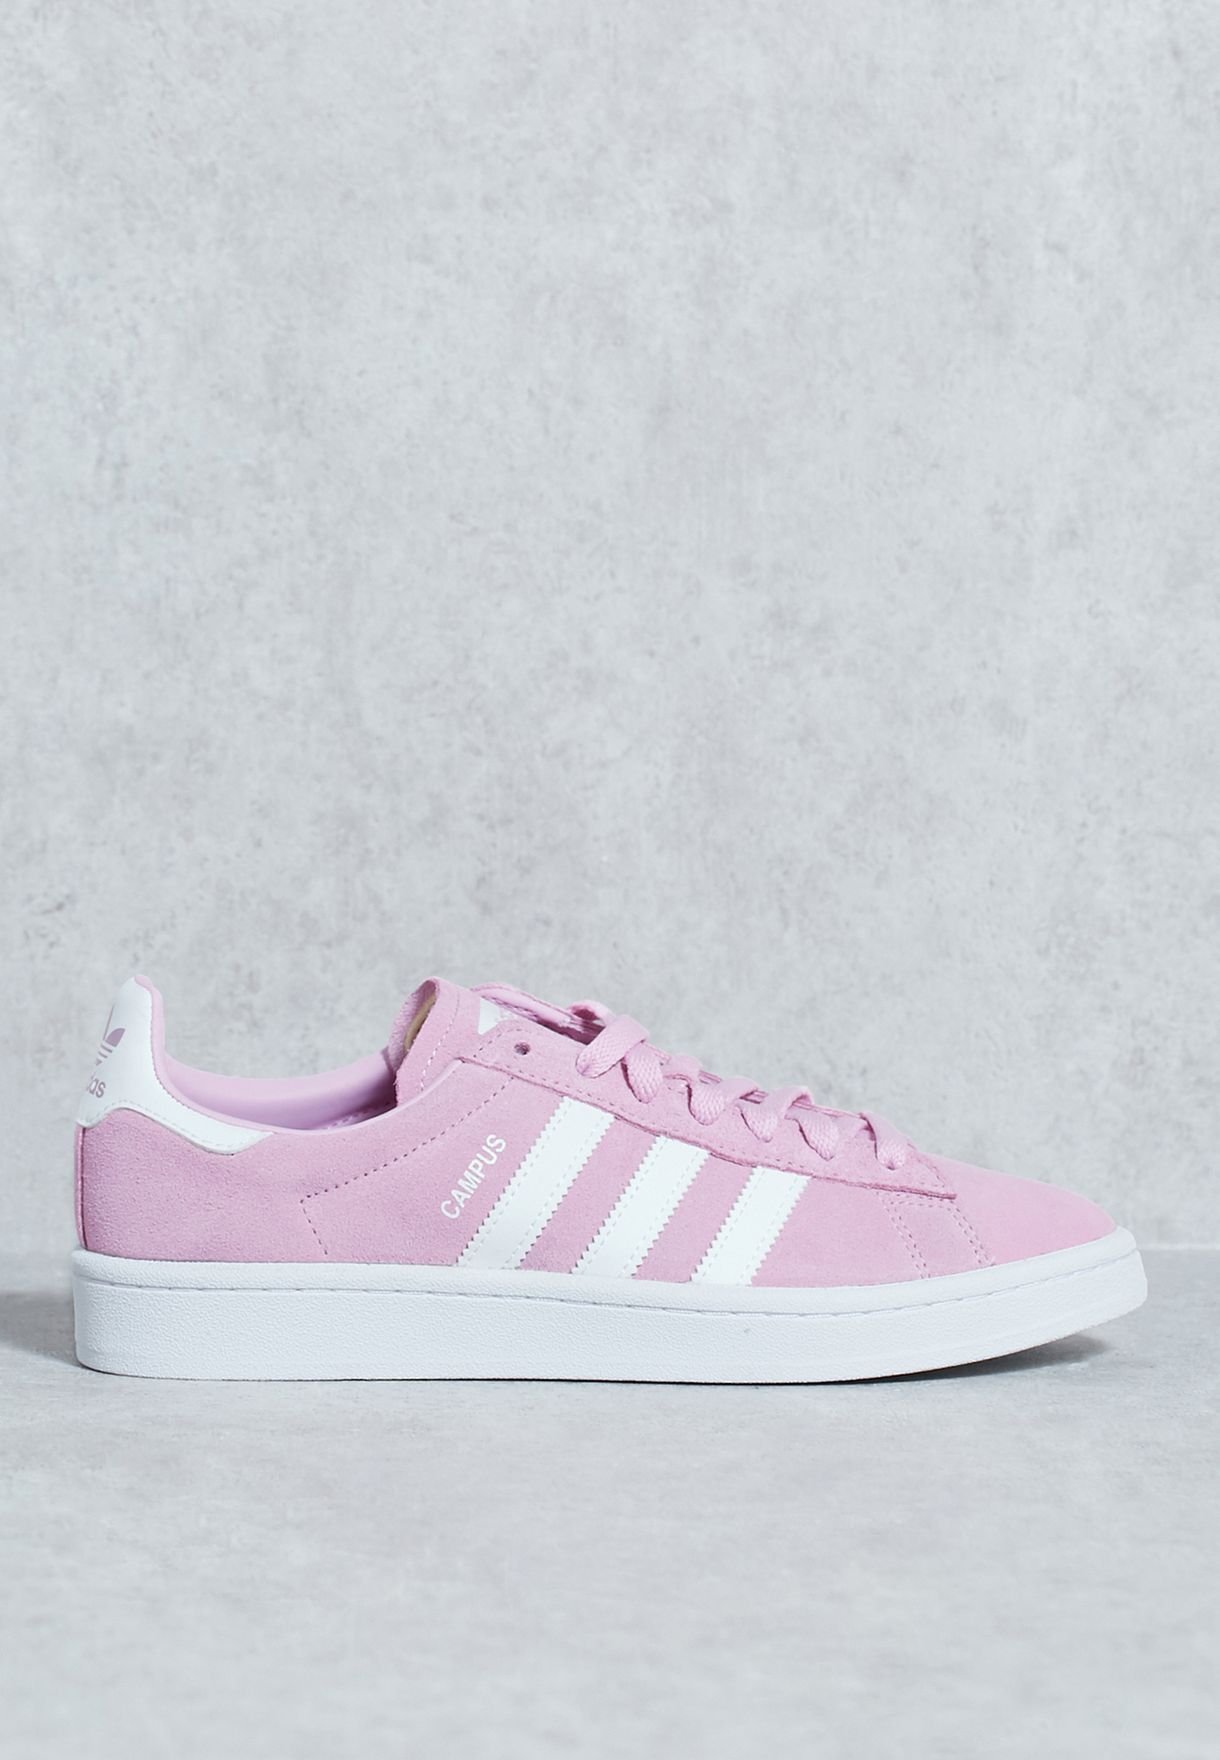 adidas campus shoes pink